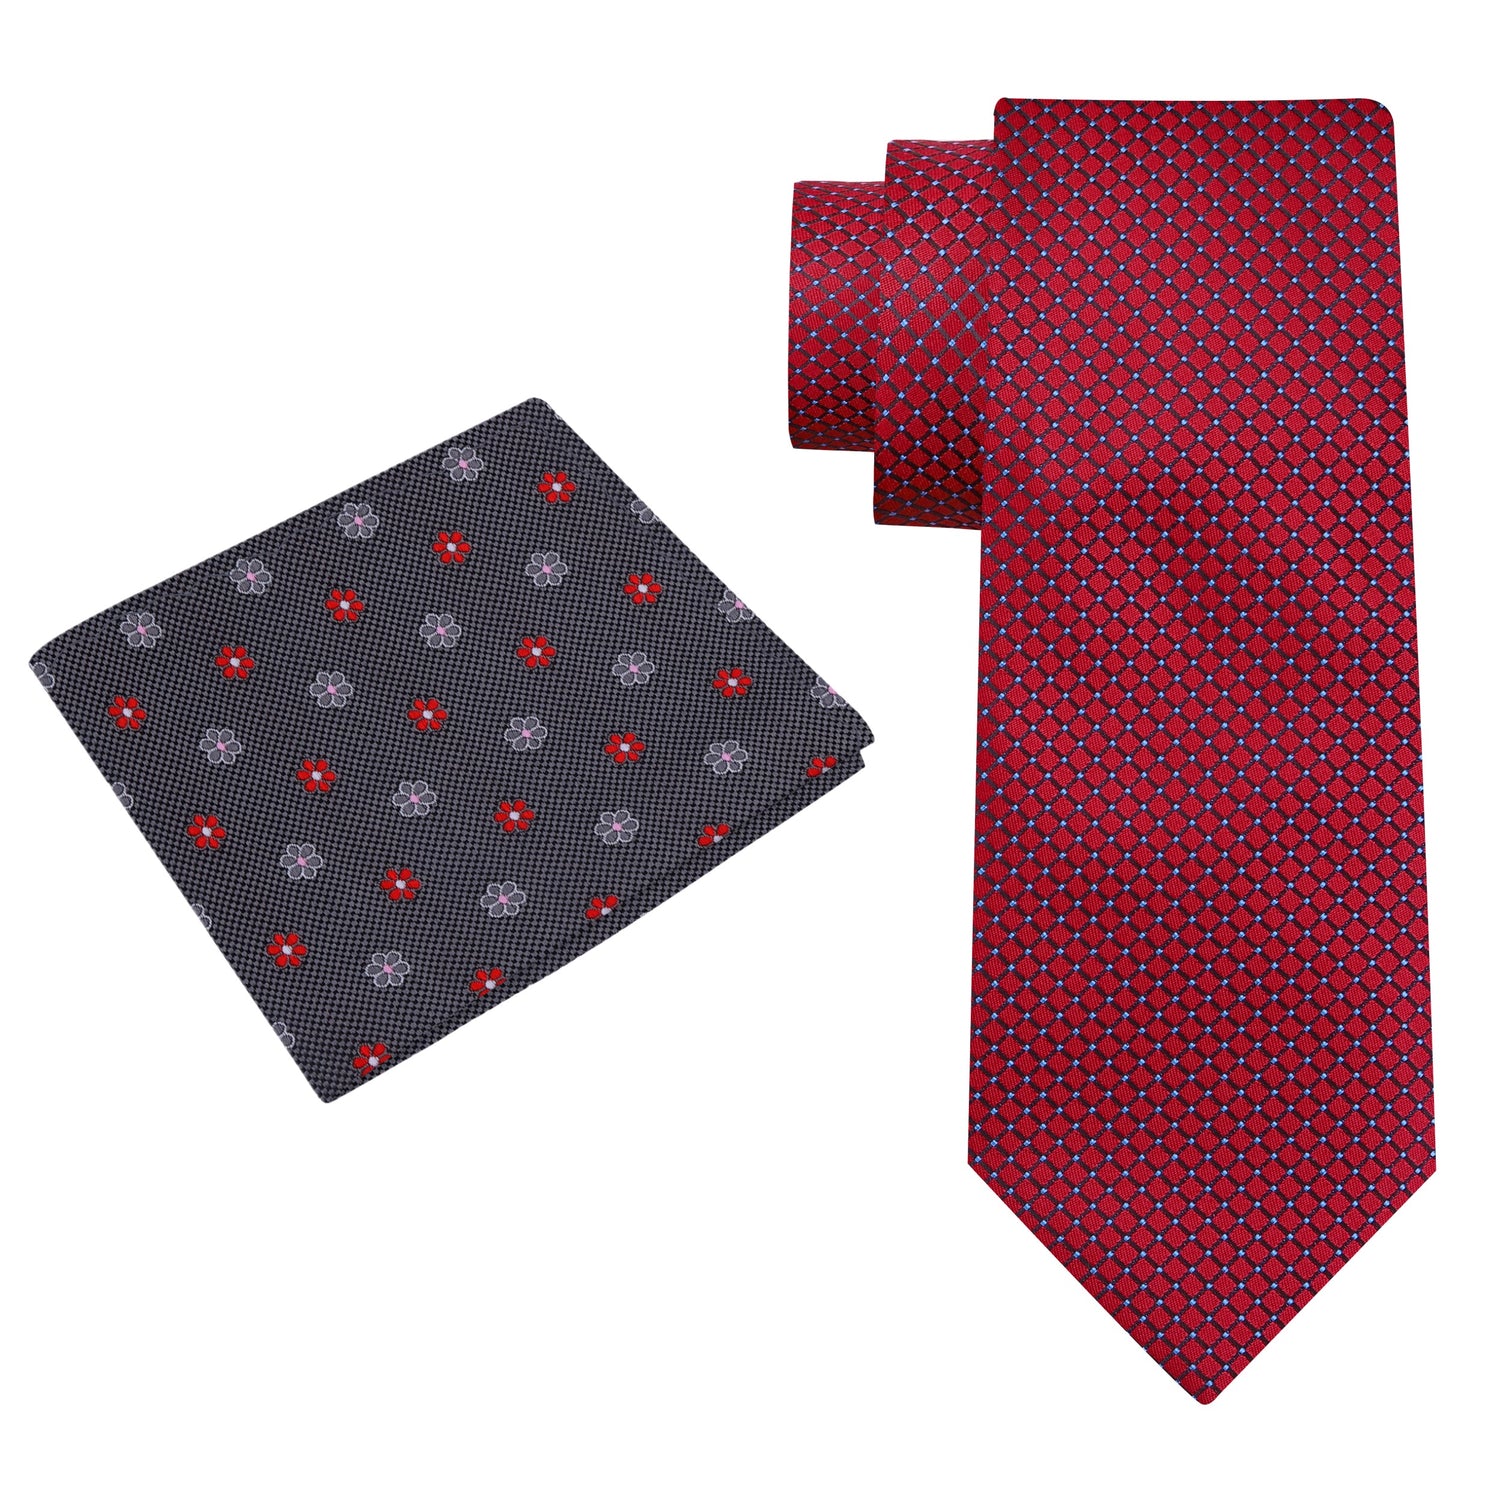 Alt View: A Burgundy Small Geometric Diamond With Small Dots Pattern Silk Necktie With Grey, Red Floral Pocket Square